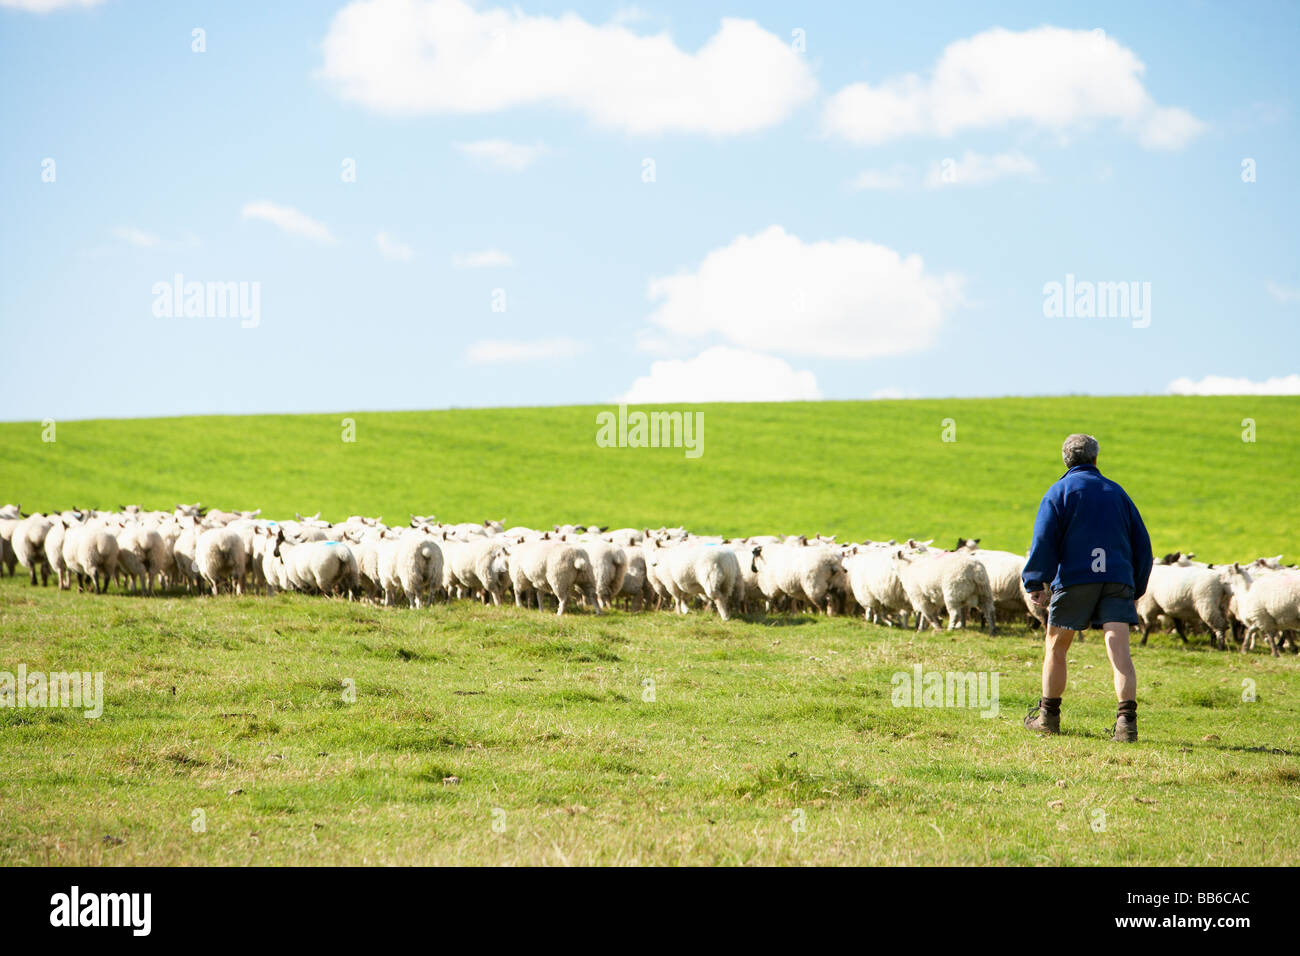 Farm Worker With Flock Of Sheep Stock Photo